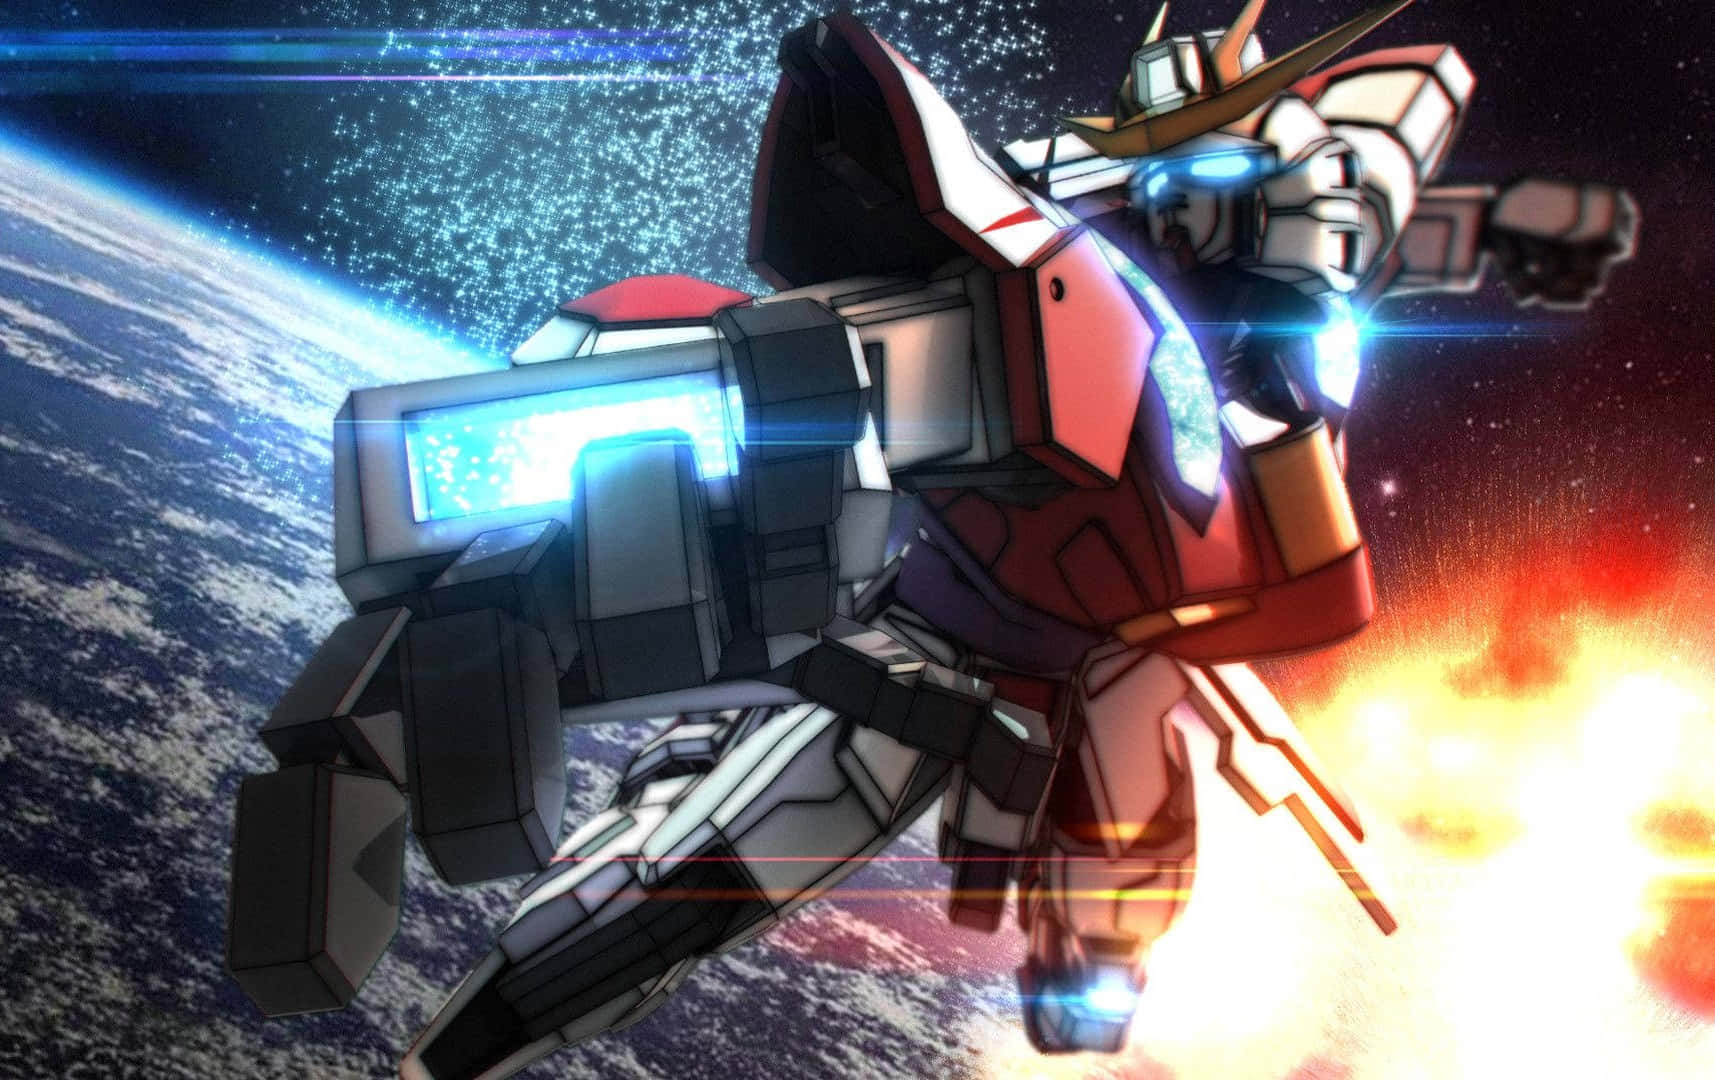 Immerse yourself in the world of Gundam with this majestic piece of artwork